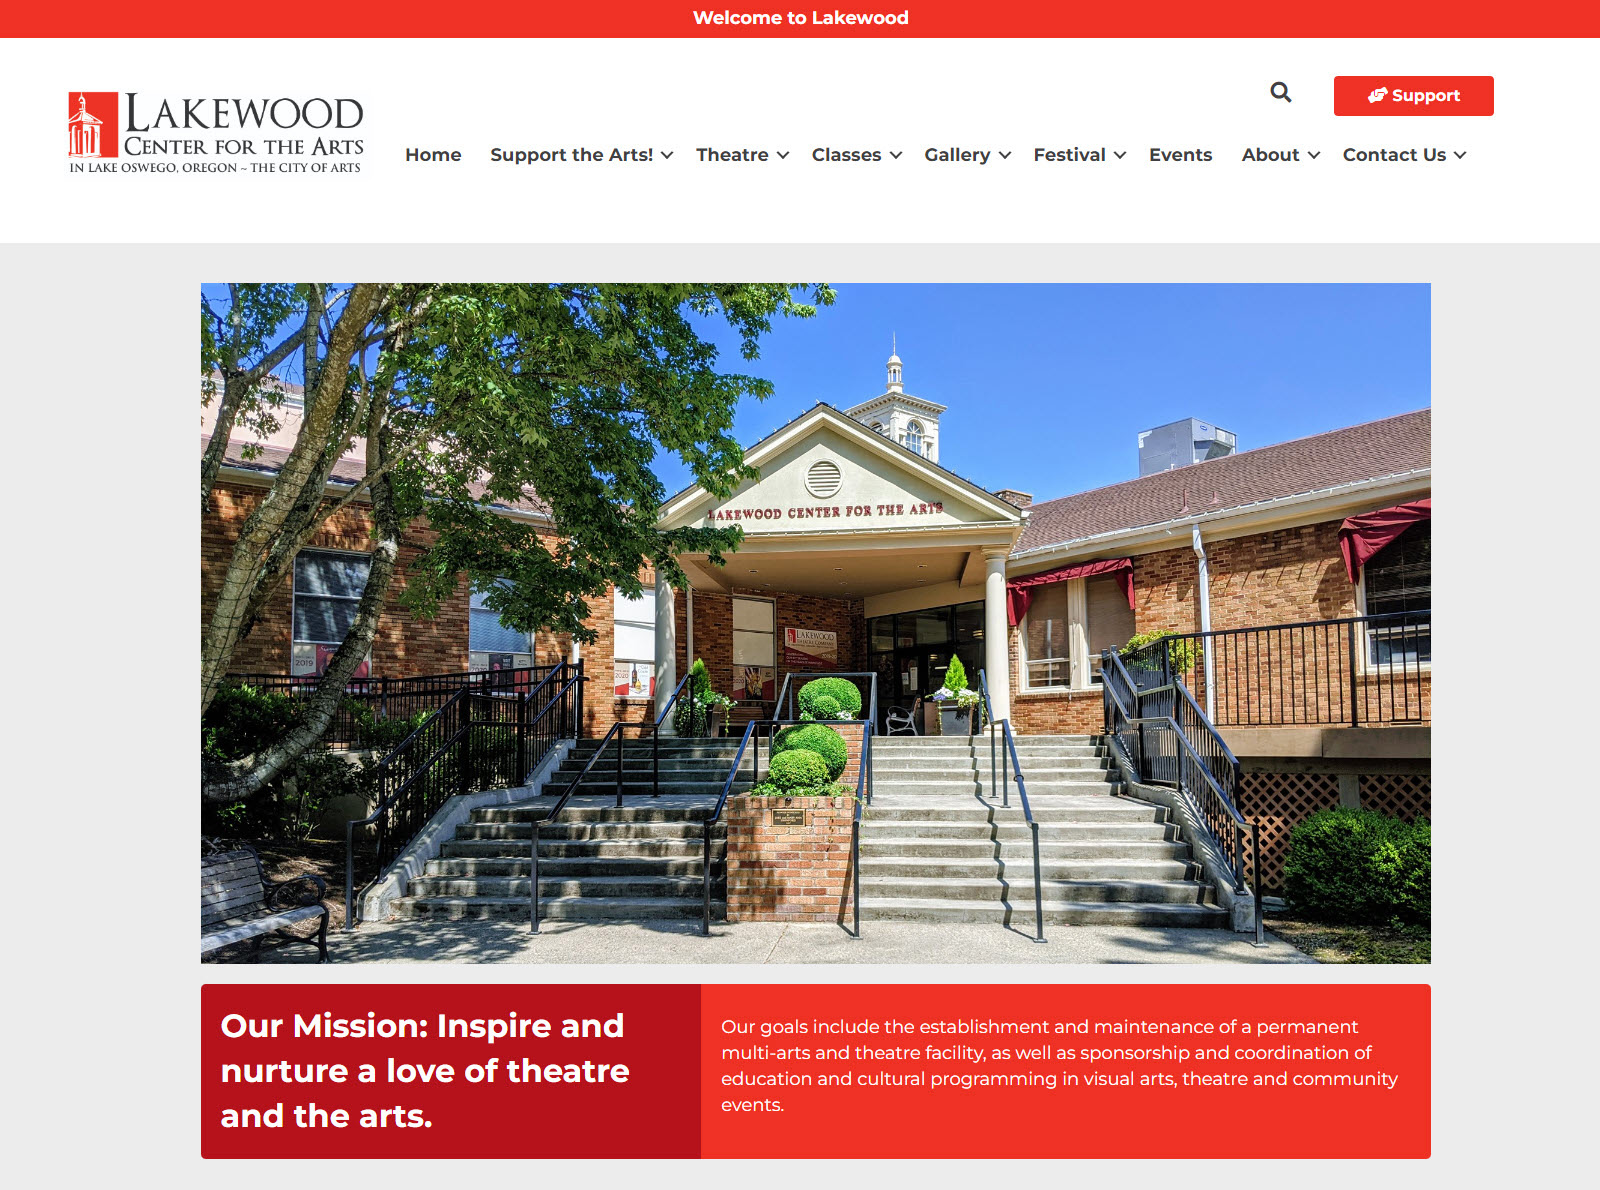 Homepage of the Lakewood Theatre website.